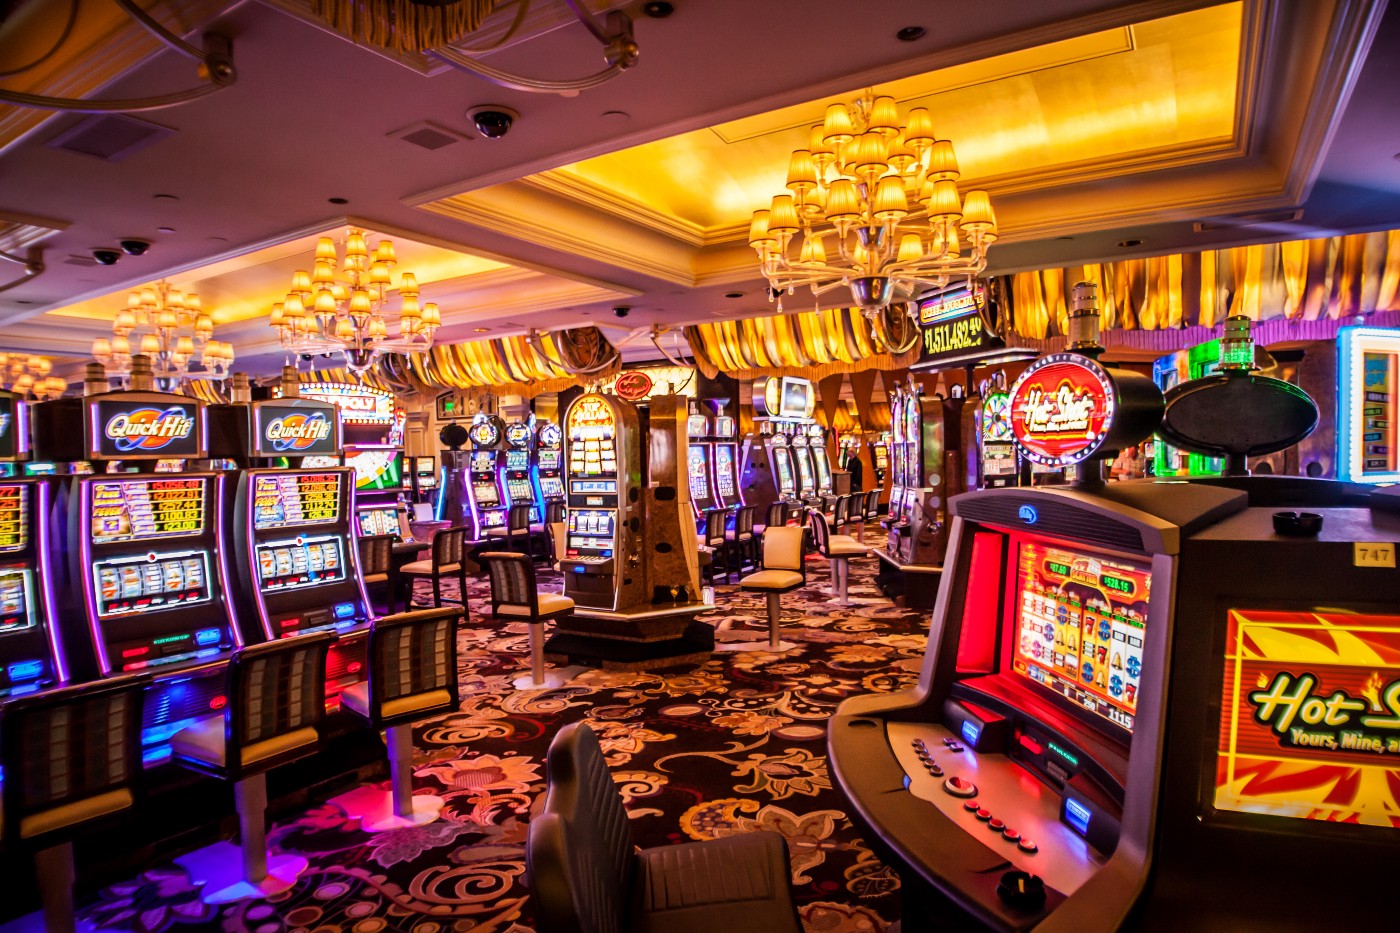 Why should we opt to gamble on slots online?